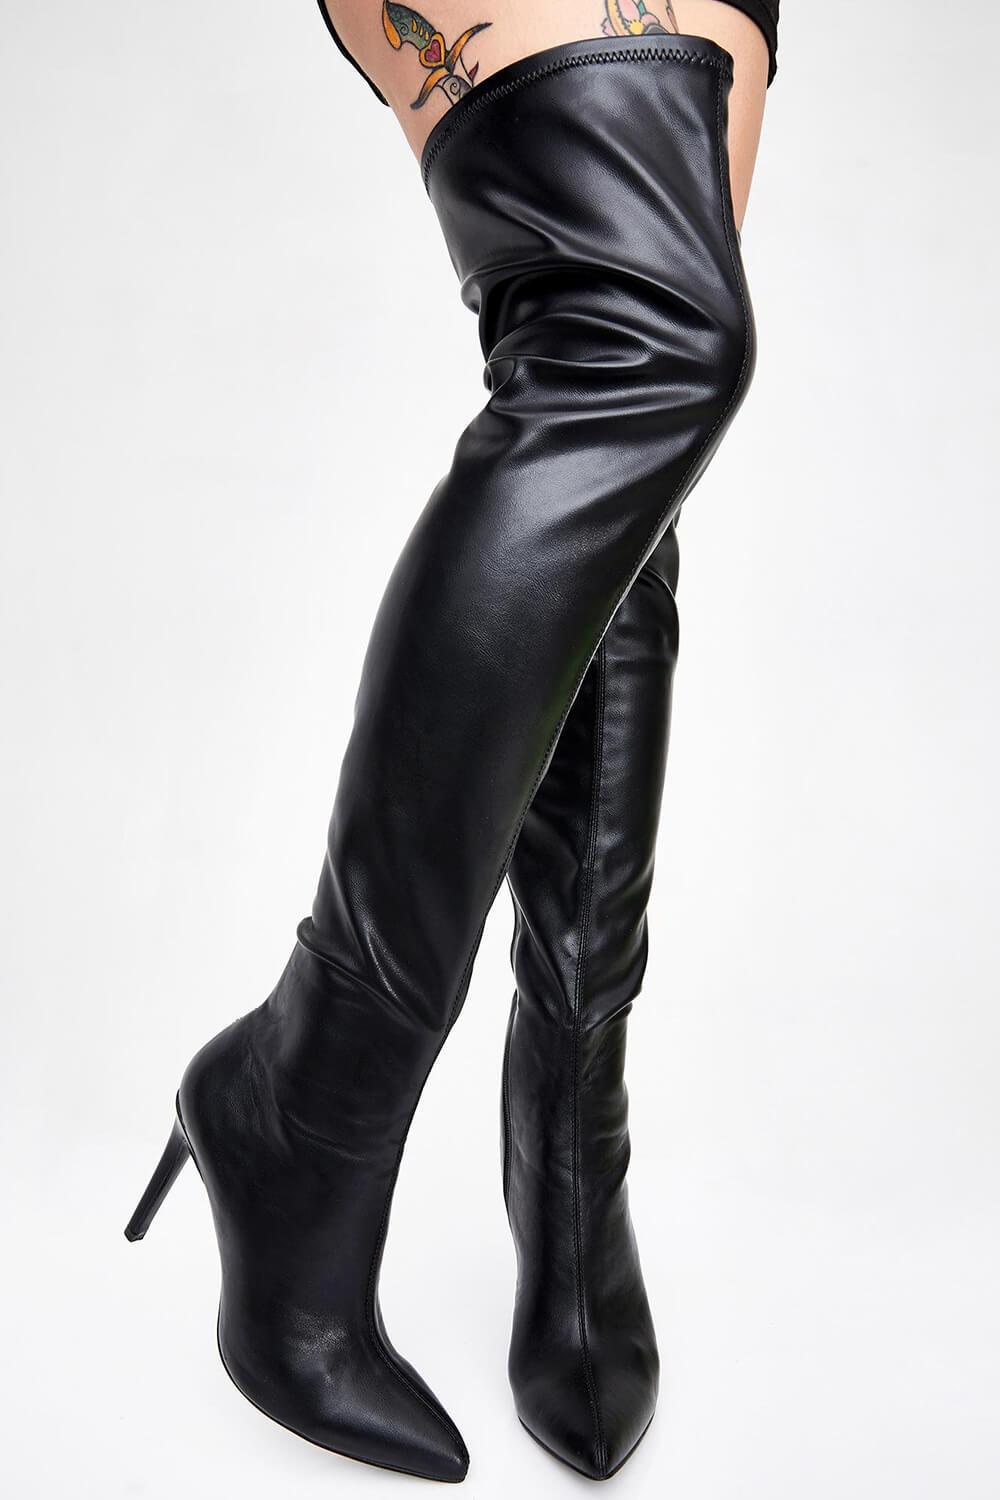 pointed toe thigh high boots